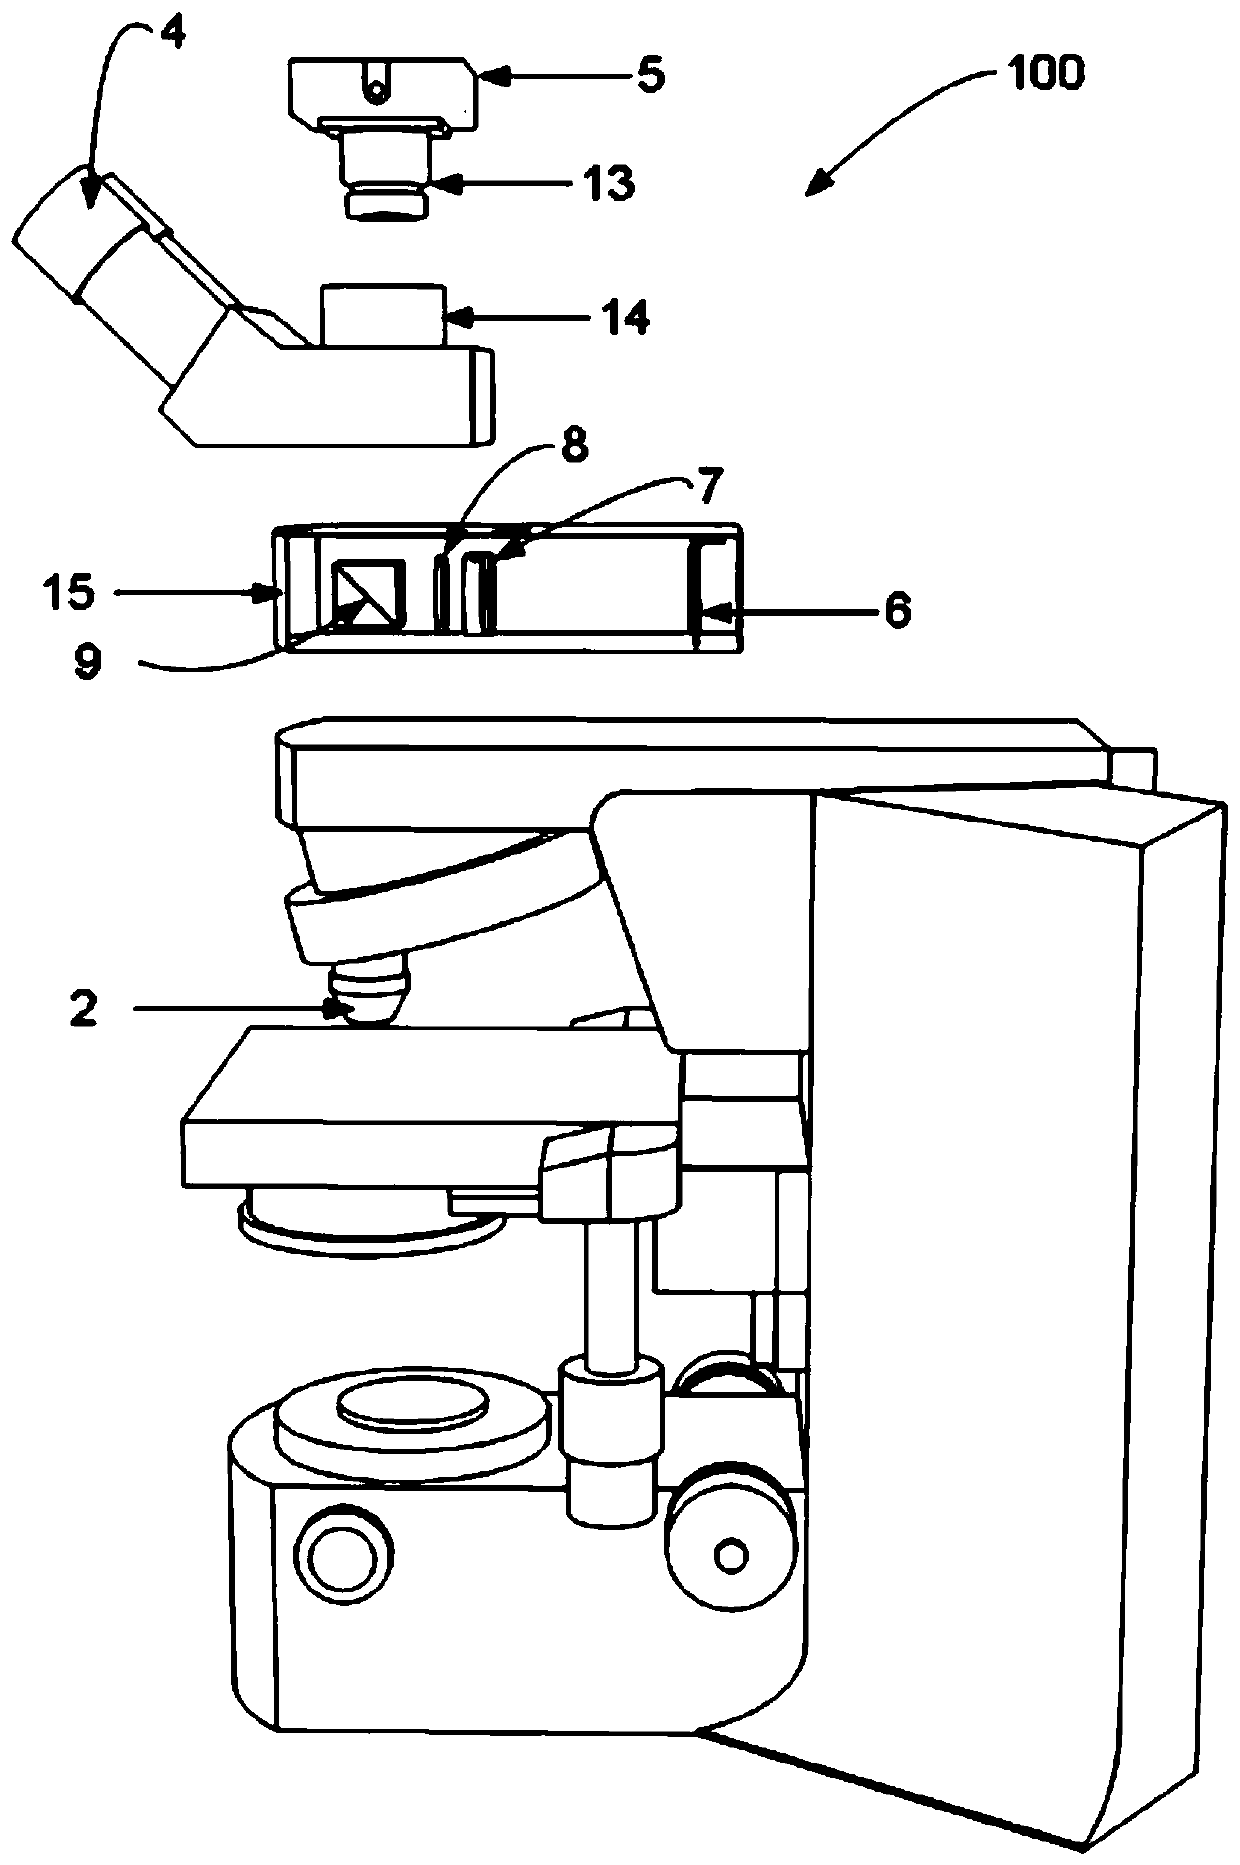 Augmented reality microscope, image projection equipment and image processing system